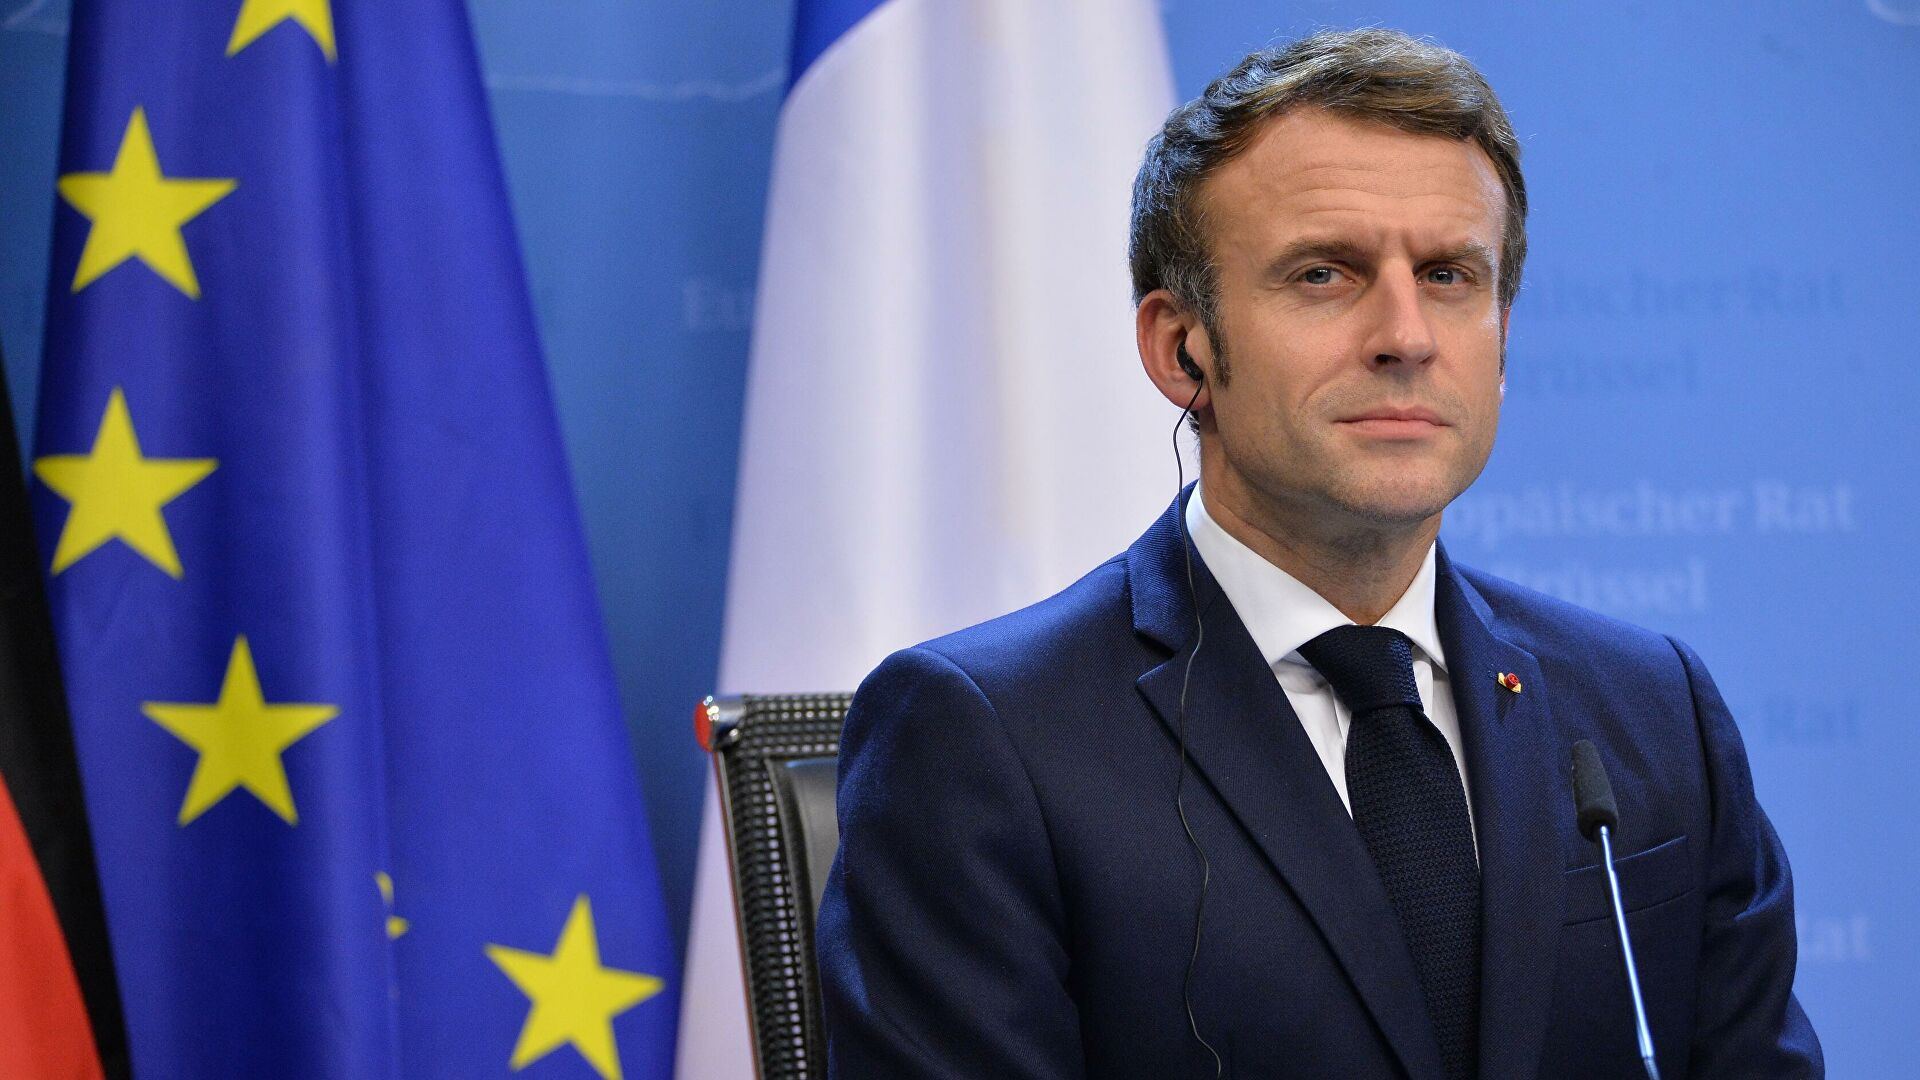 France to increase support for Ukraine to $2B - Macron